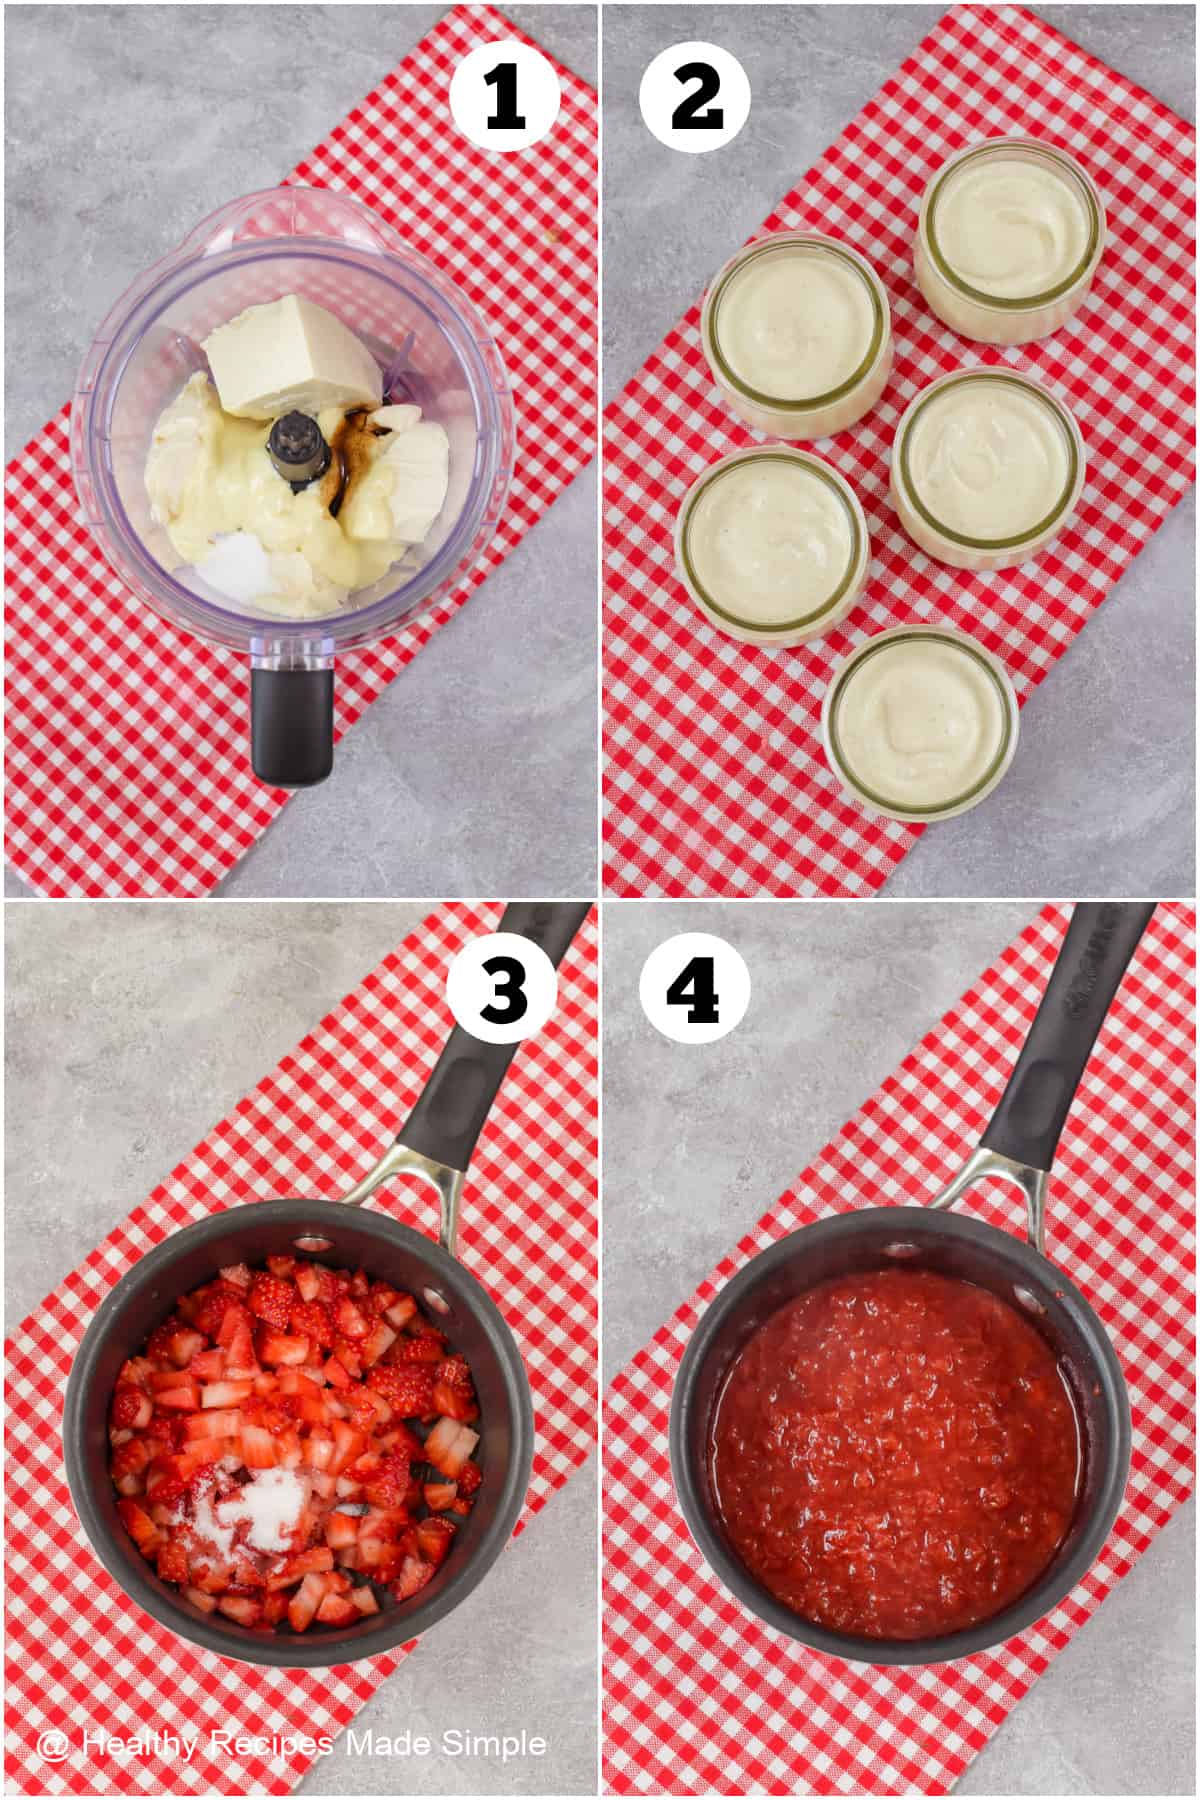 Four pictures collaged together showing how to make homemade plant pudding with berries.